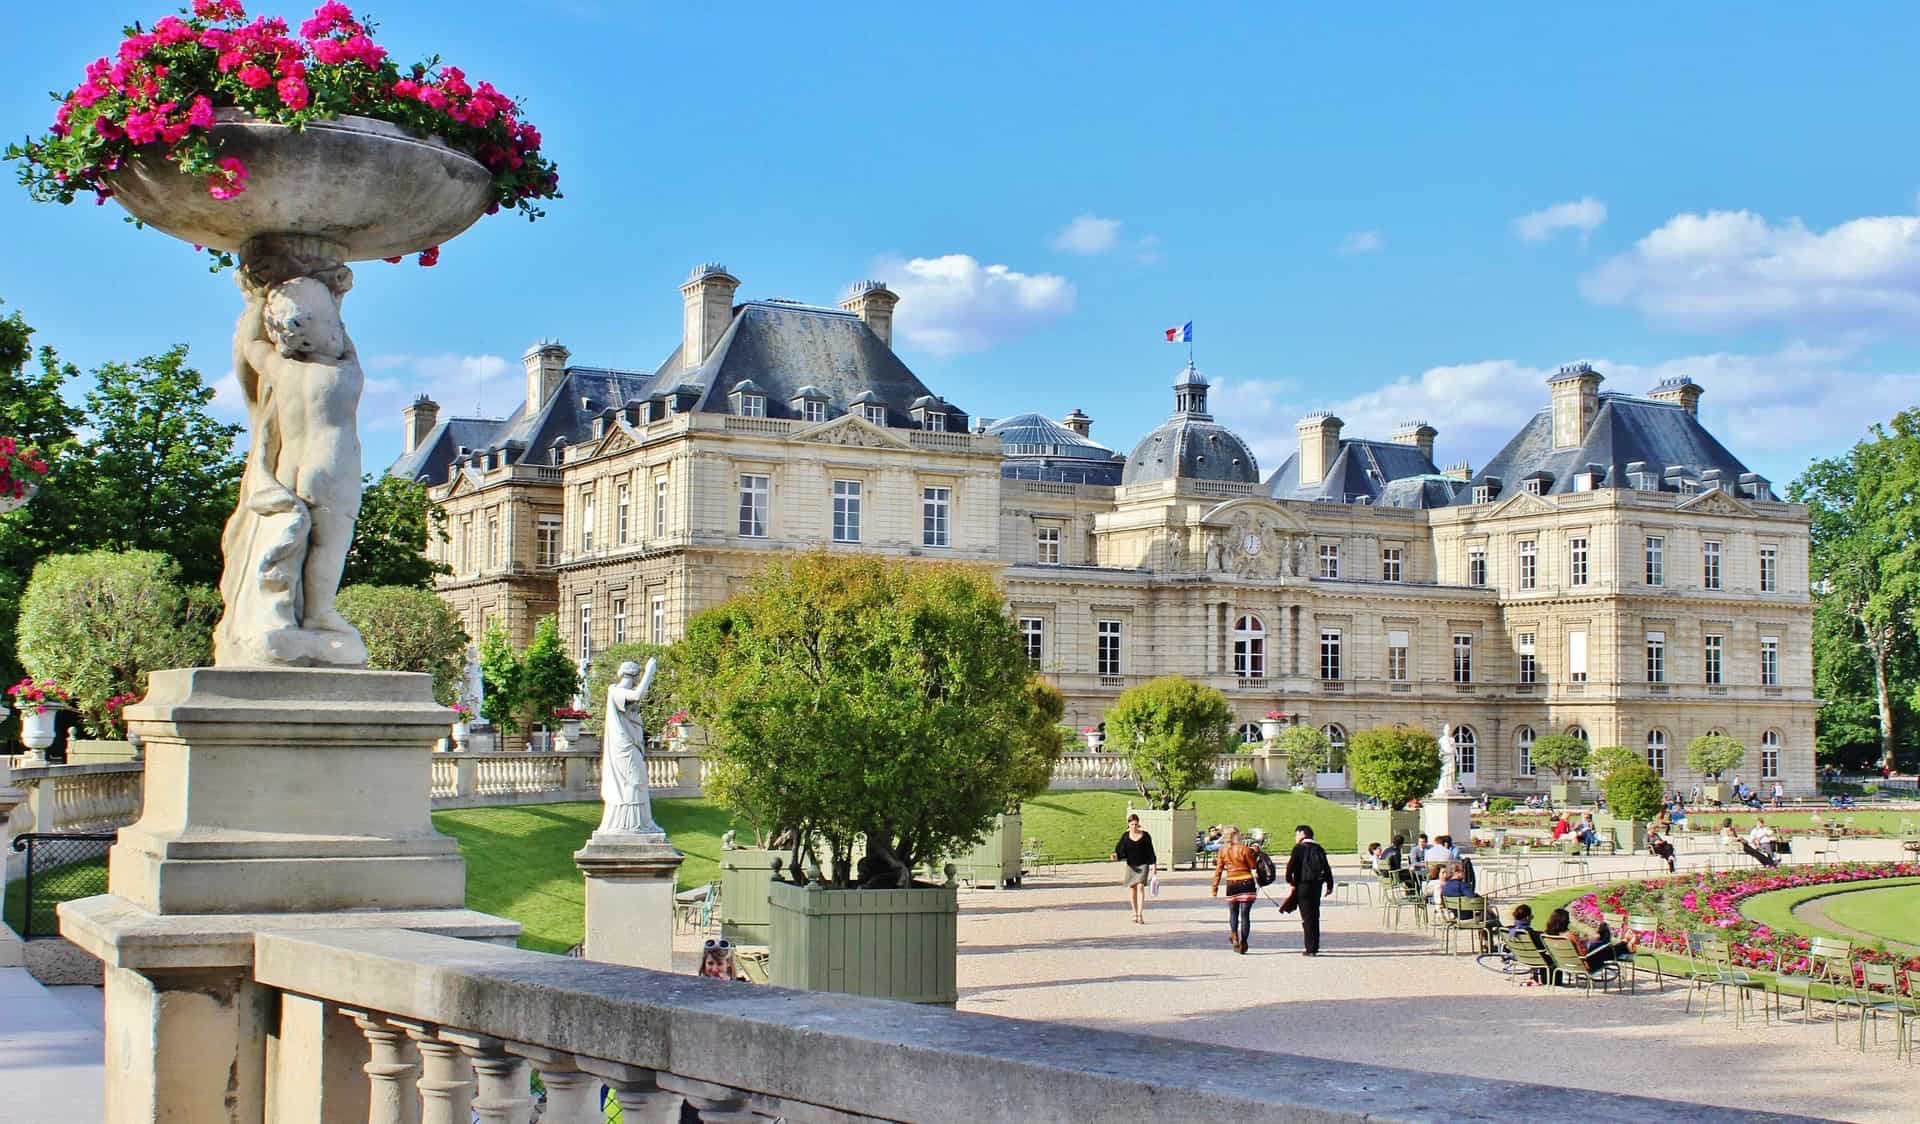 TheGardens of Luxembourg in Paris